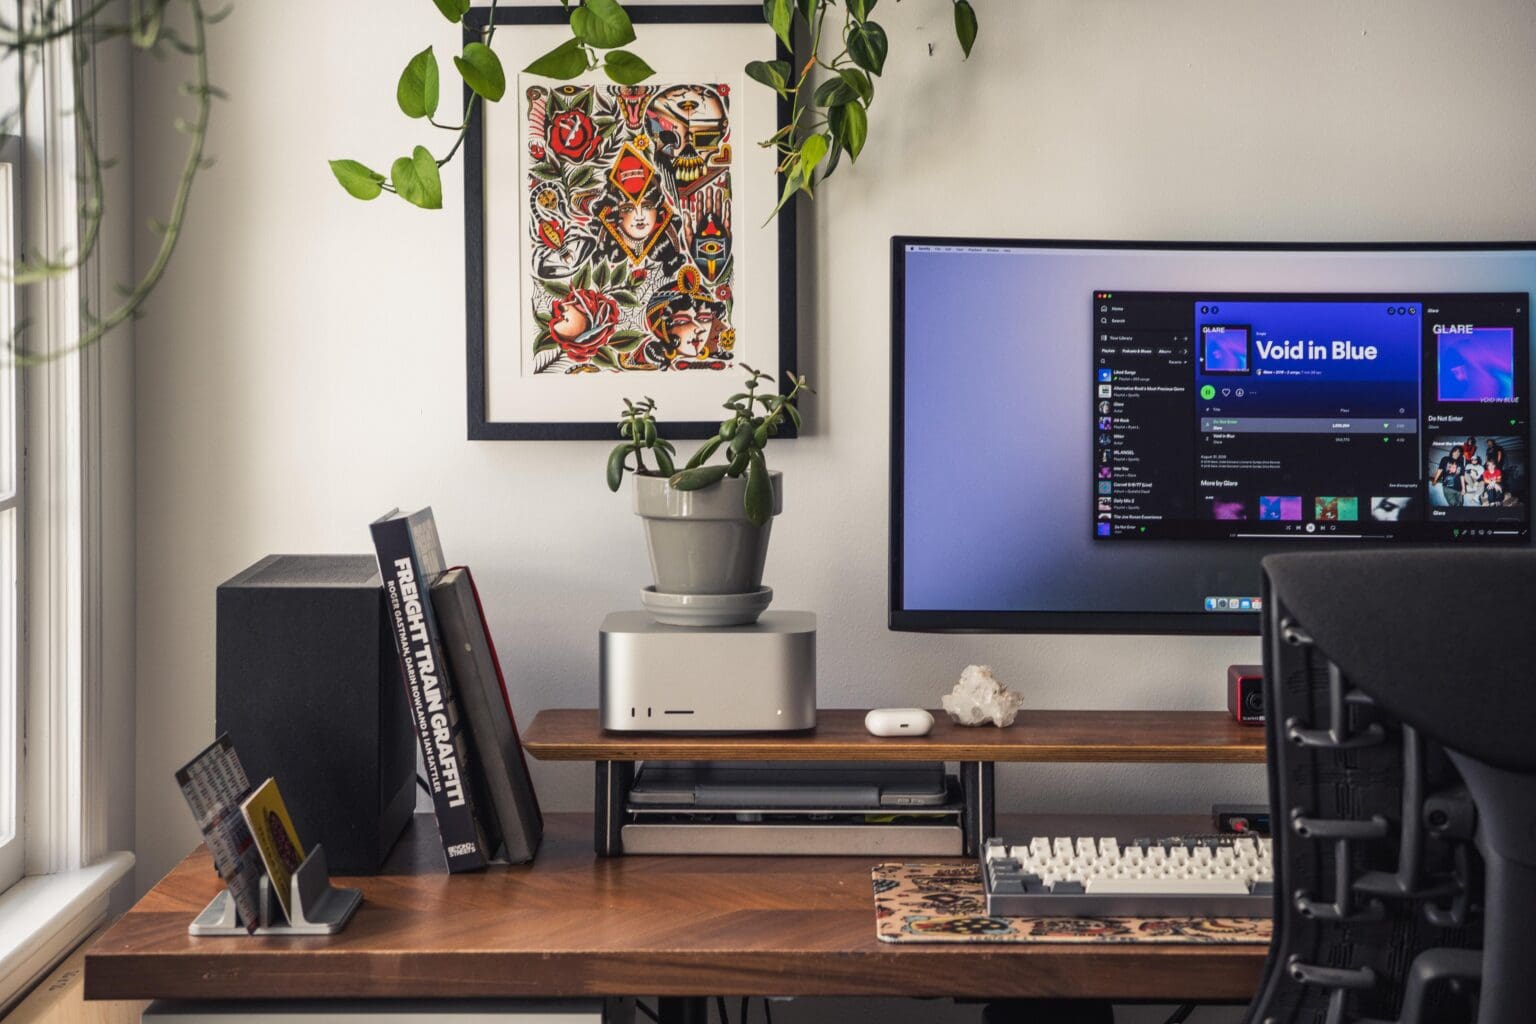 This nicely composed frame shows the M2 Mac Studio as a plant stand.